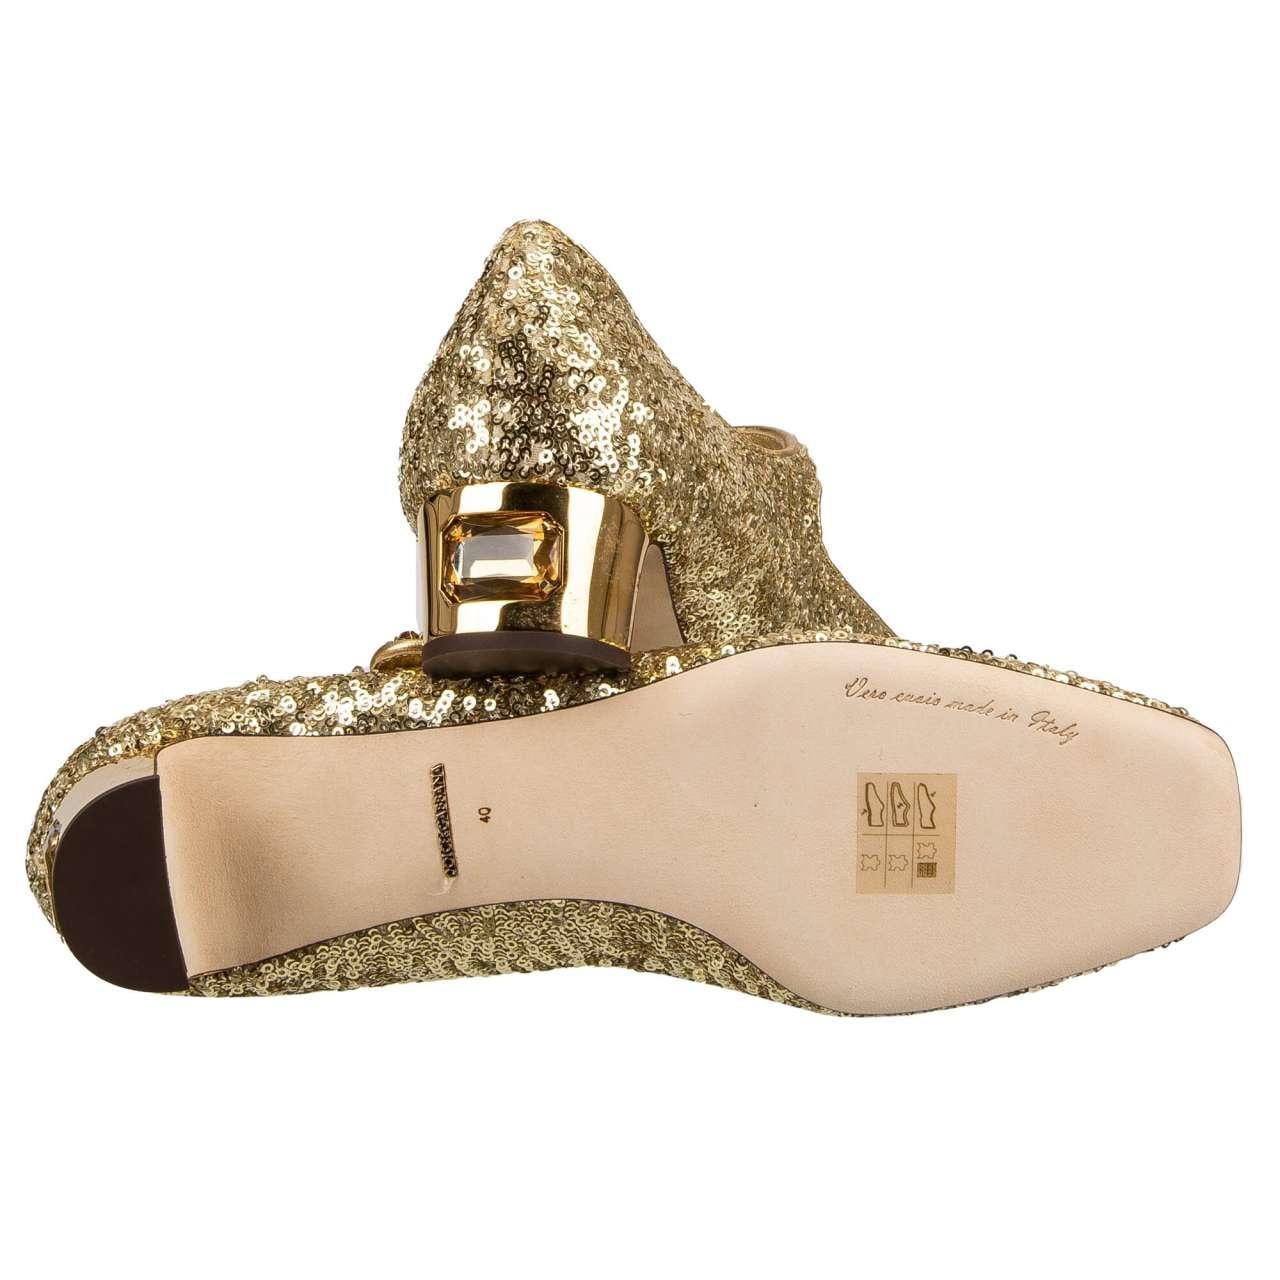 Dolce & Gabbana - Sequin Crystal Heels Mary Jane Pumps VALLY Gold 40 US 10 For Sale 4